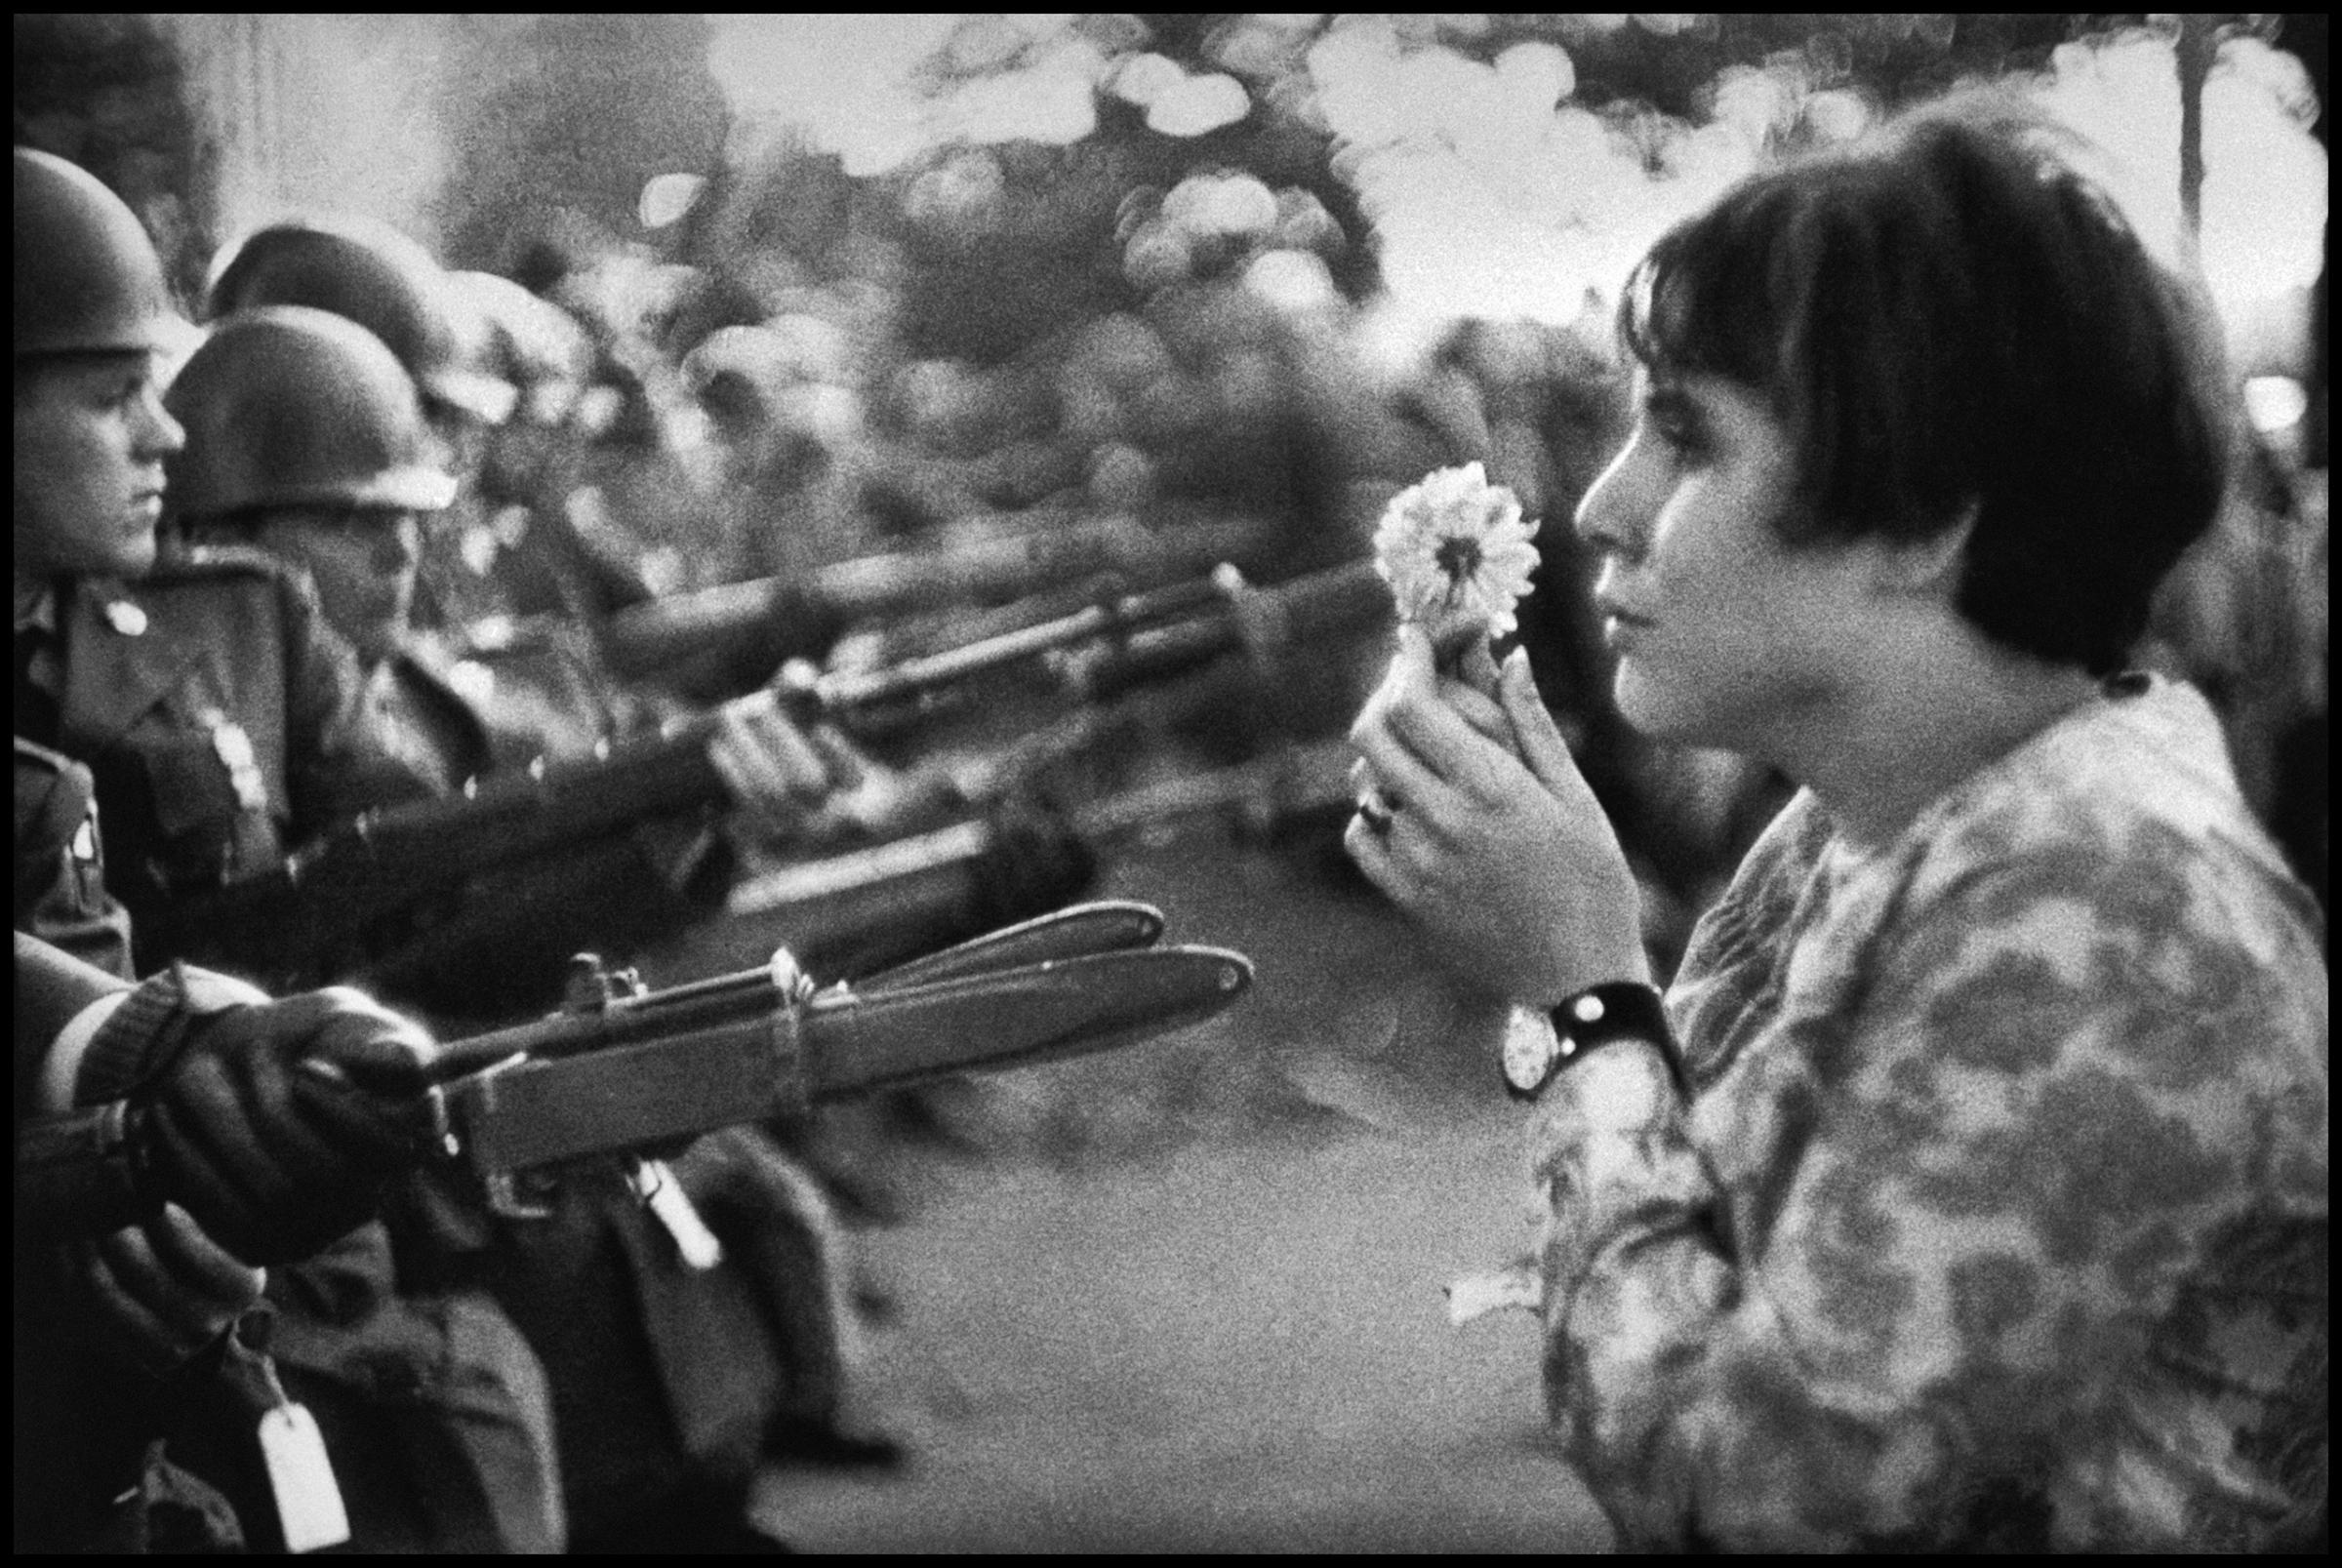 An American girl, Jan Rose Kasmir, confronts the American National Guard outside the Pentagon in Washington, D.C., during the 1967 anti-Vietnam march. This march helped to turn public opinion against the US war in Vietnam.